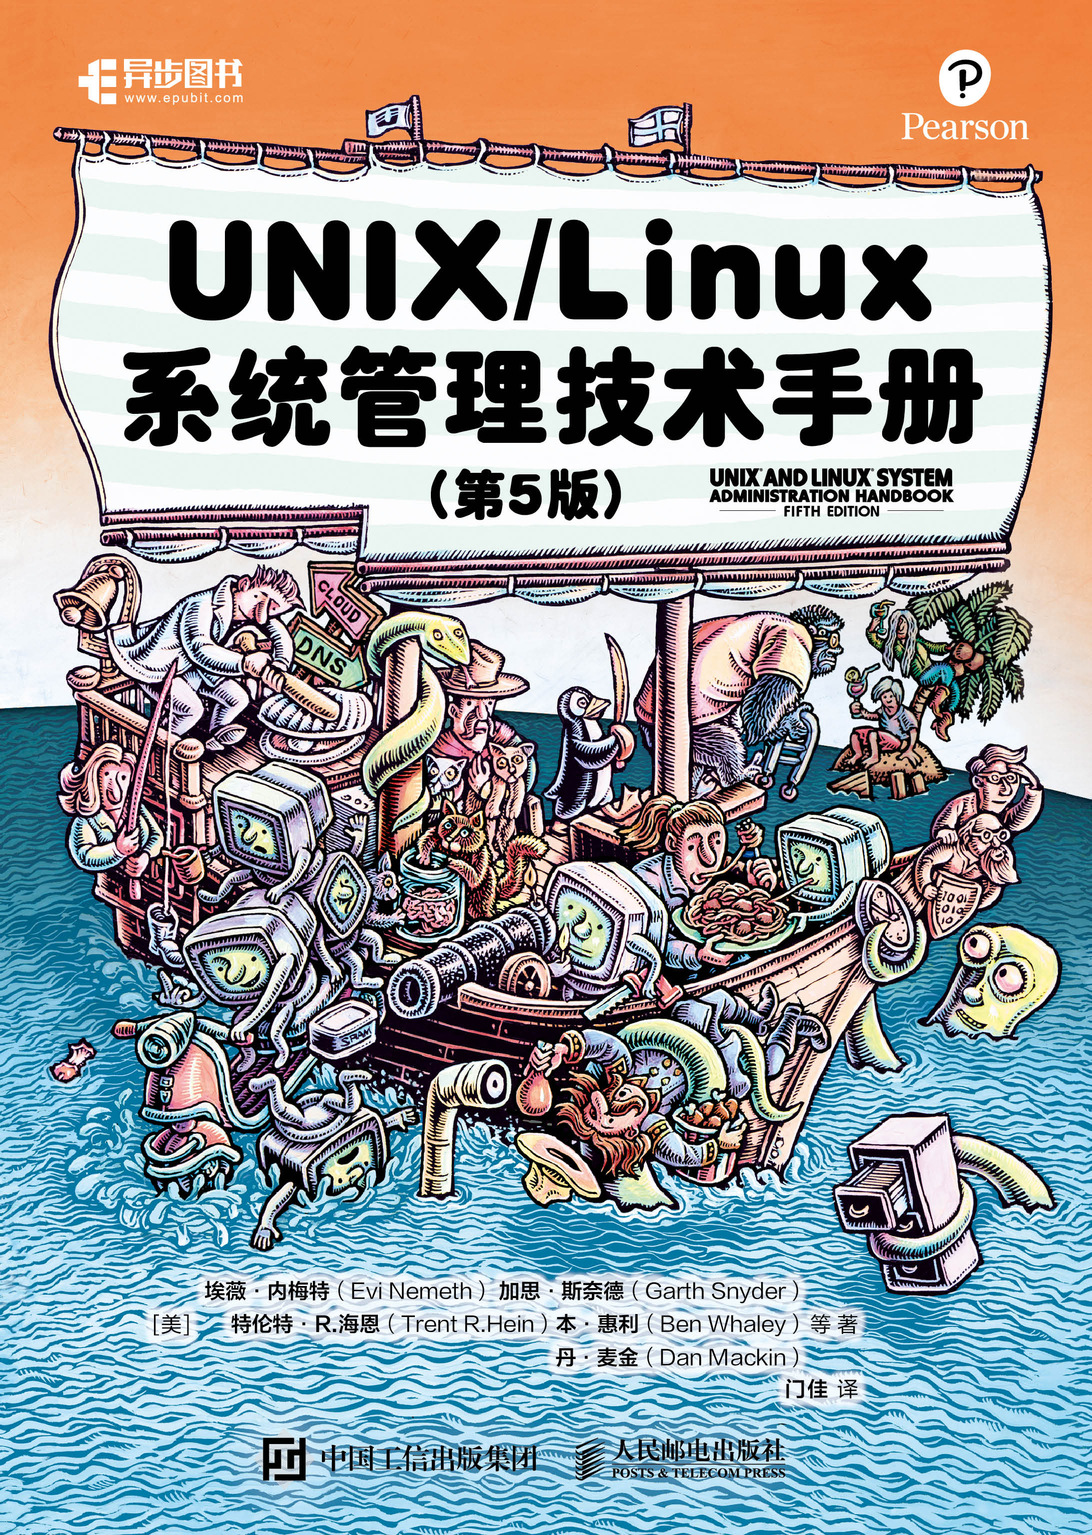 Tribute to Evi, UNIX/Linux System Management Technical Manual 5th Edition